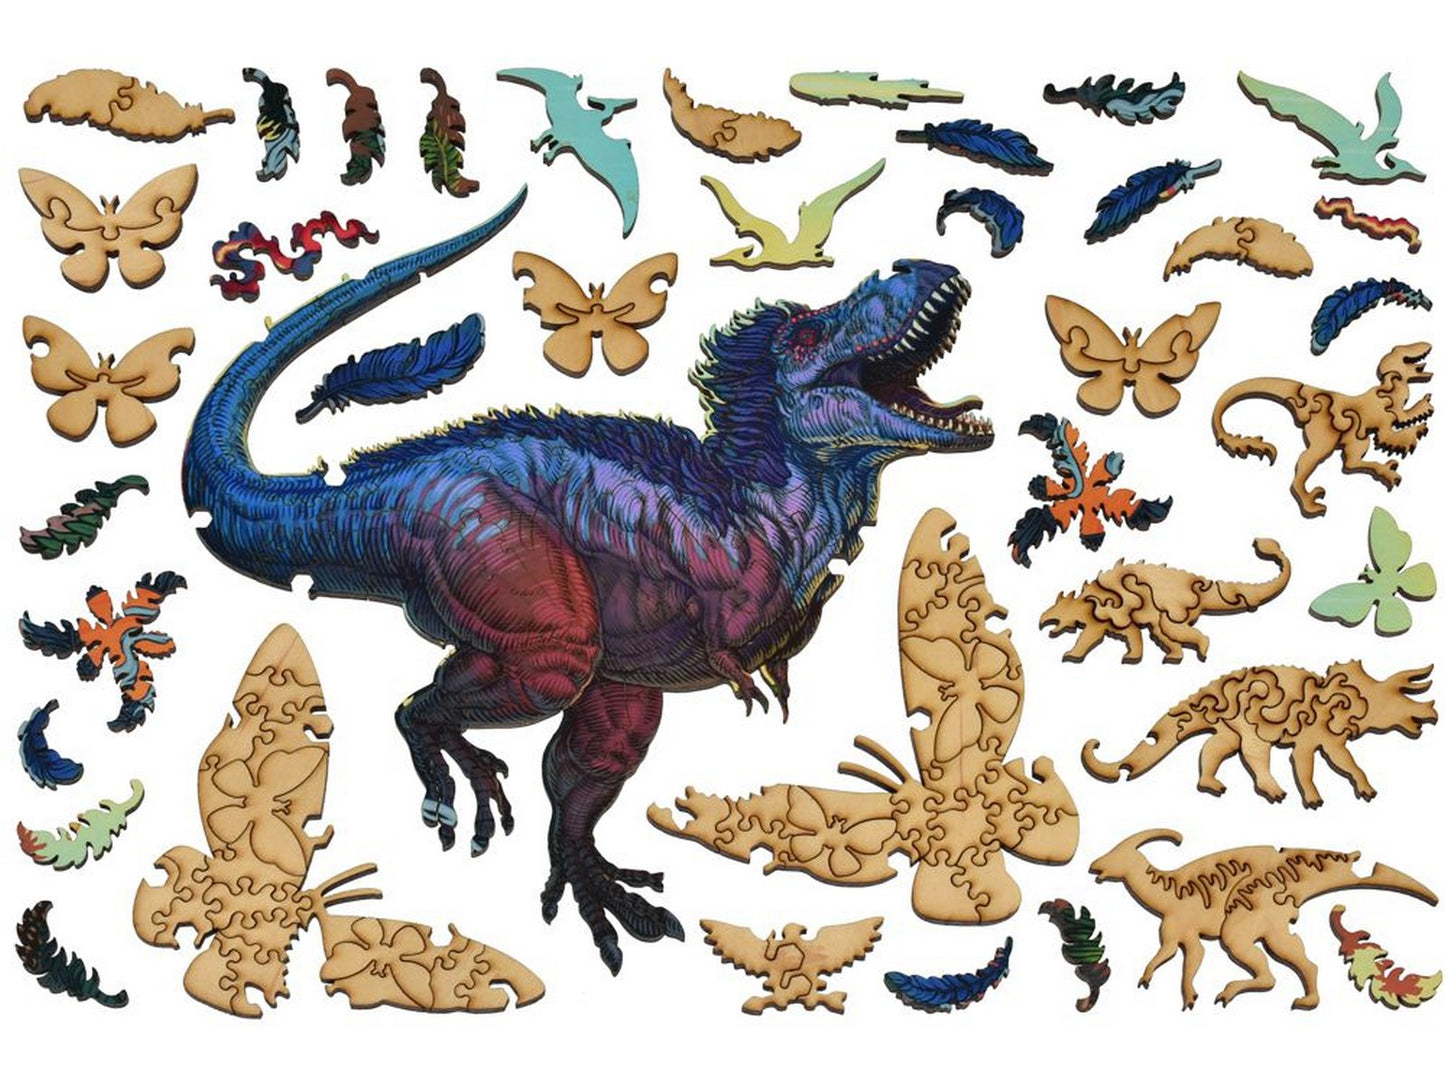 The whimsies that can be found in the puzzle, Chasing Butterflies 66 Mya.